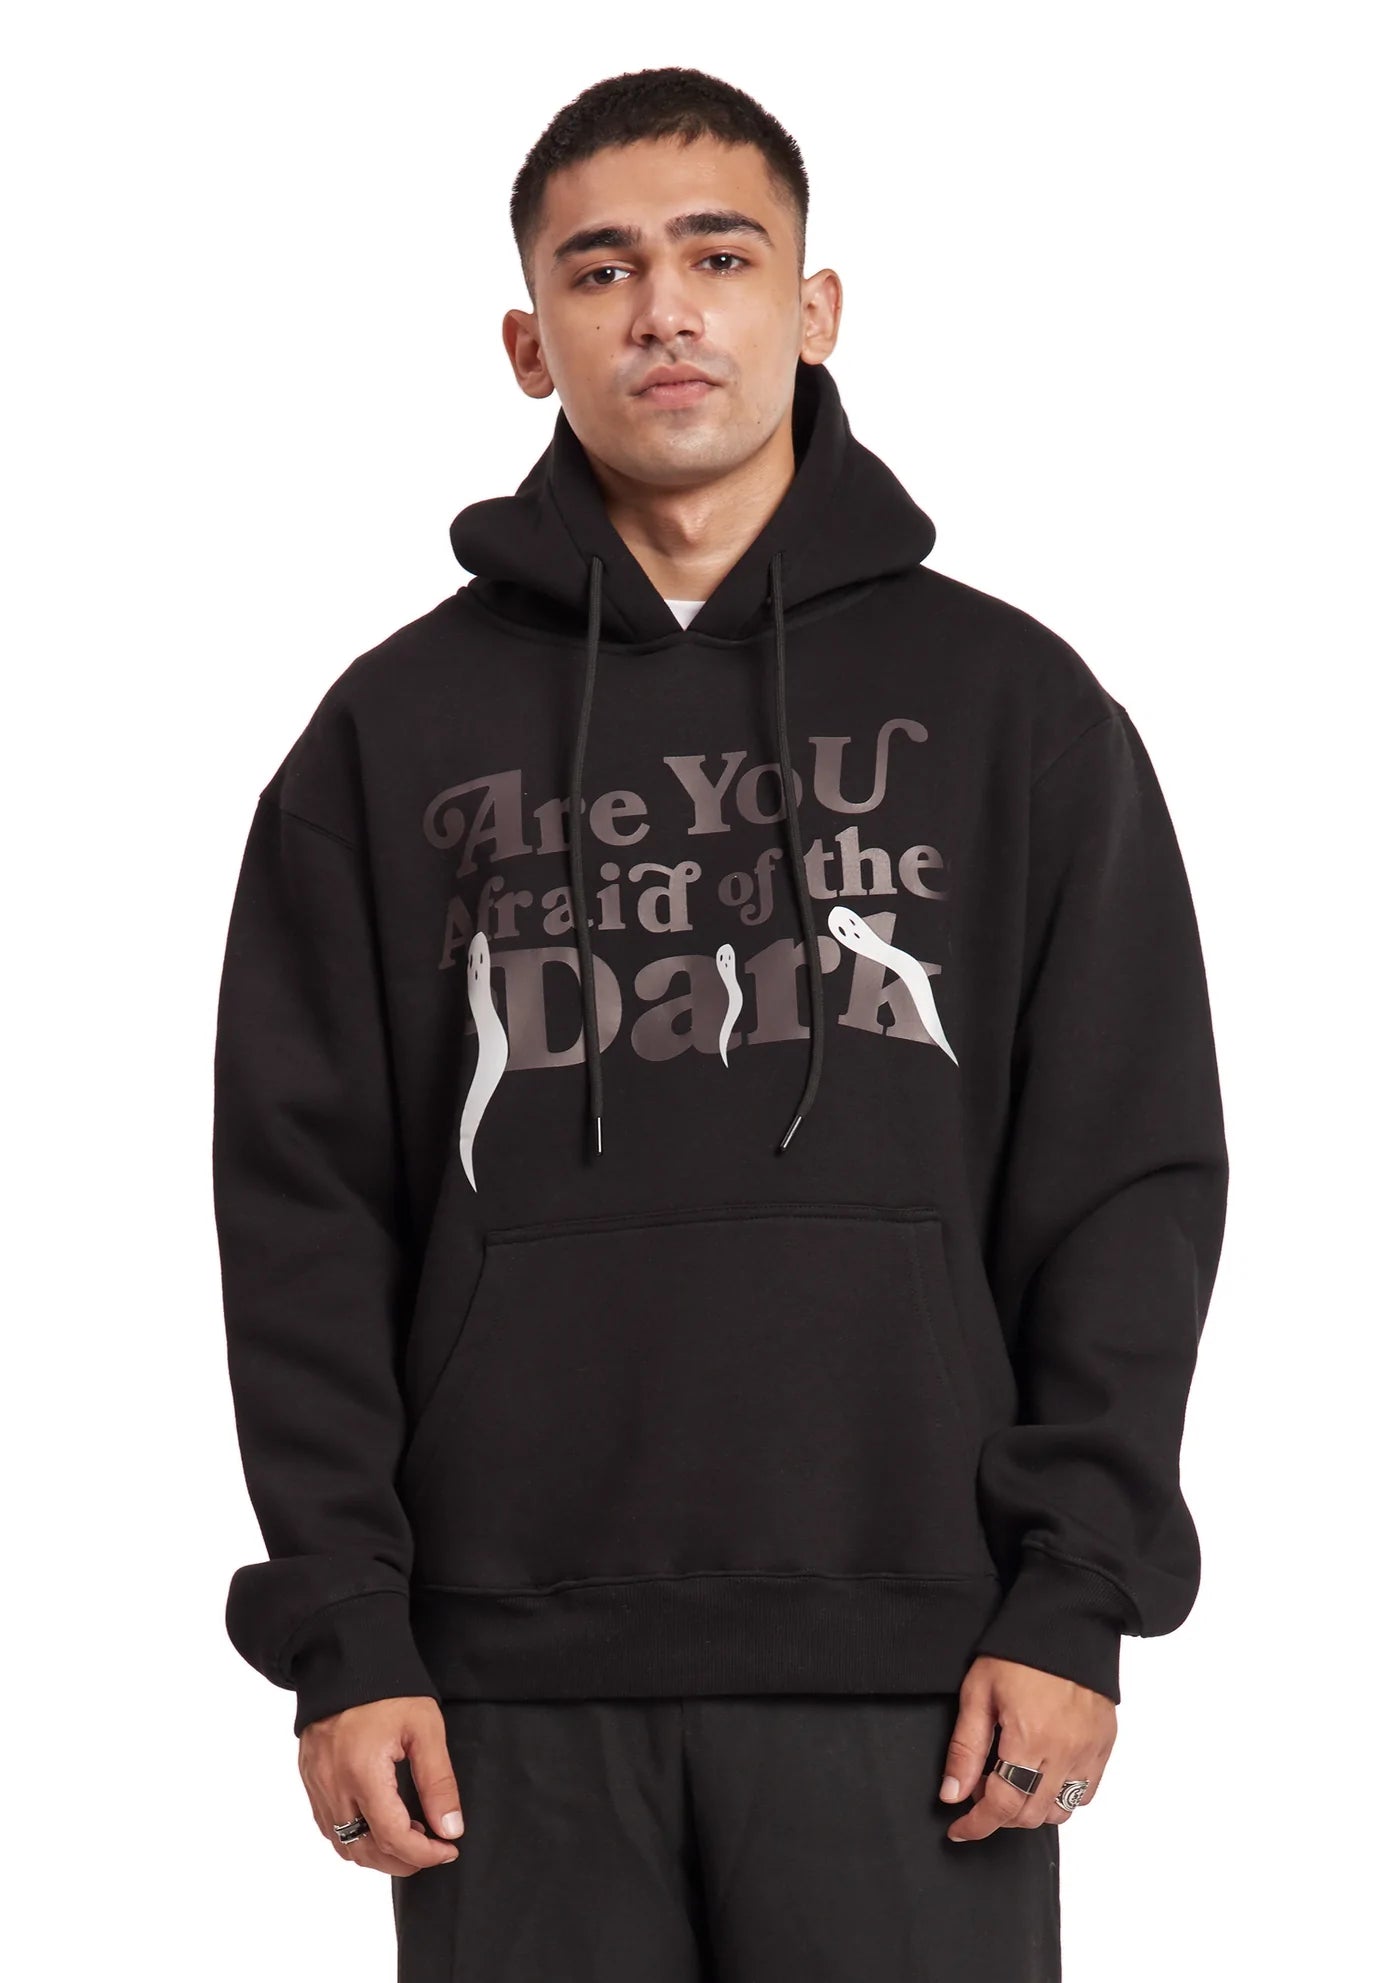 Halo Effect Men's 'Are You Afraid' Reflective Black Hoodie